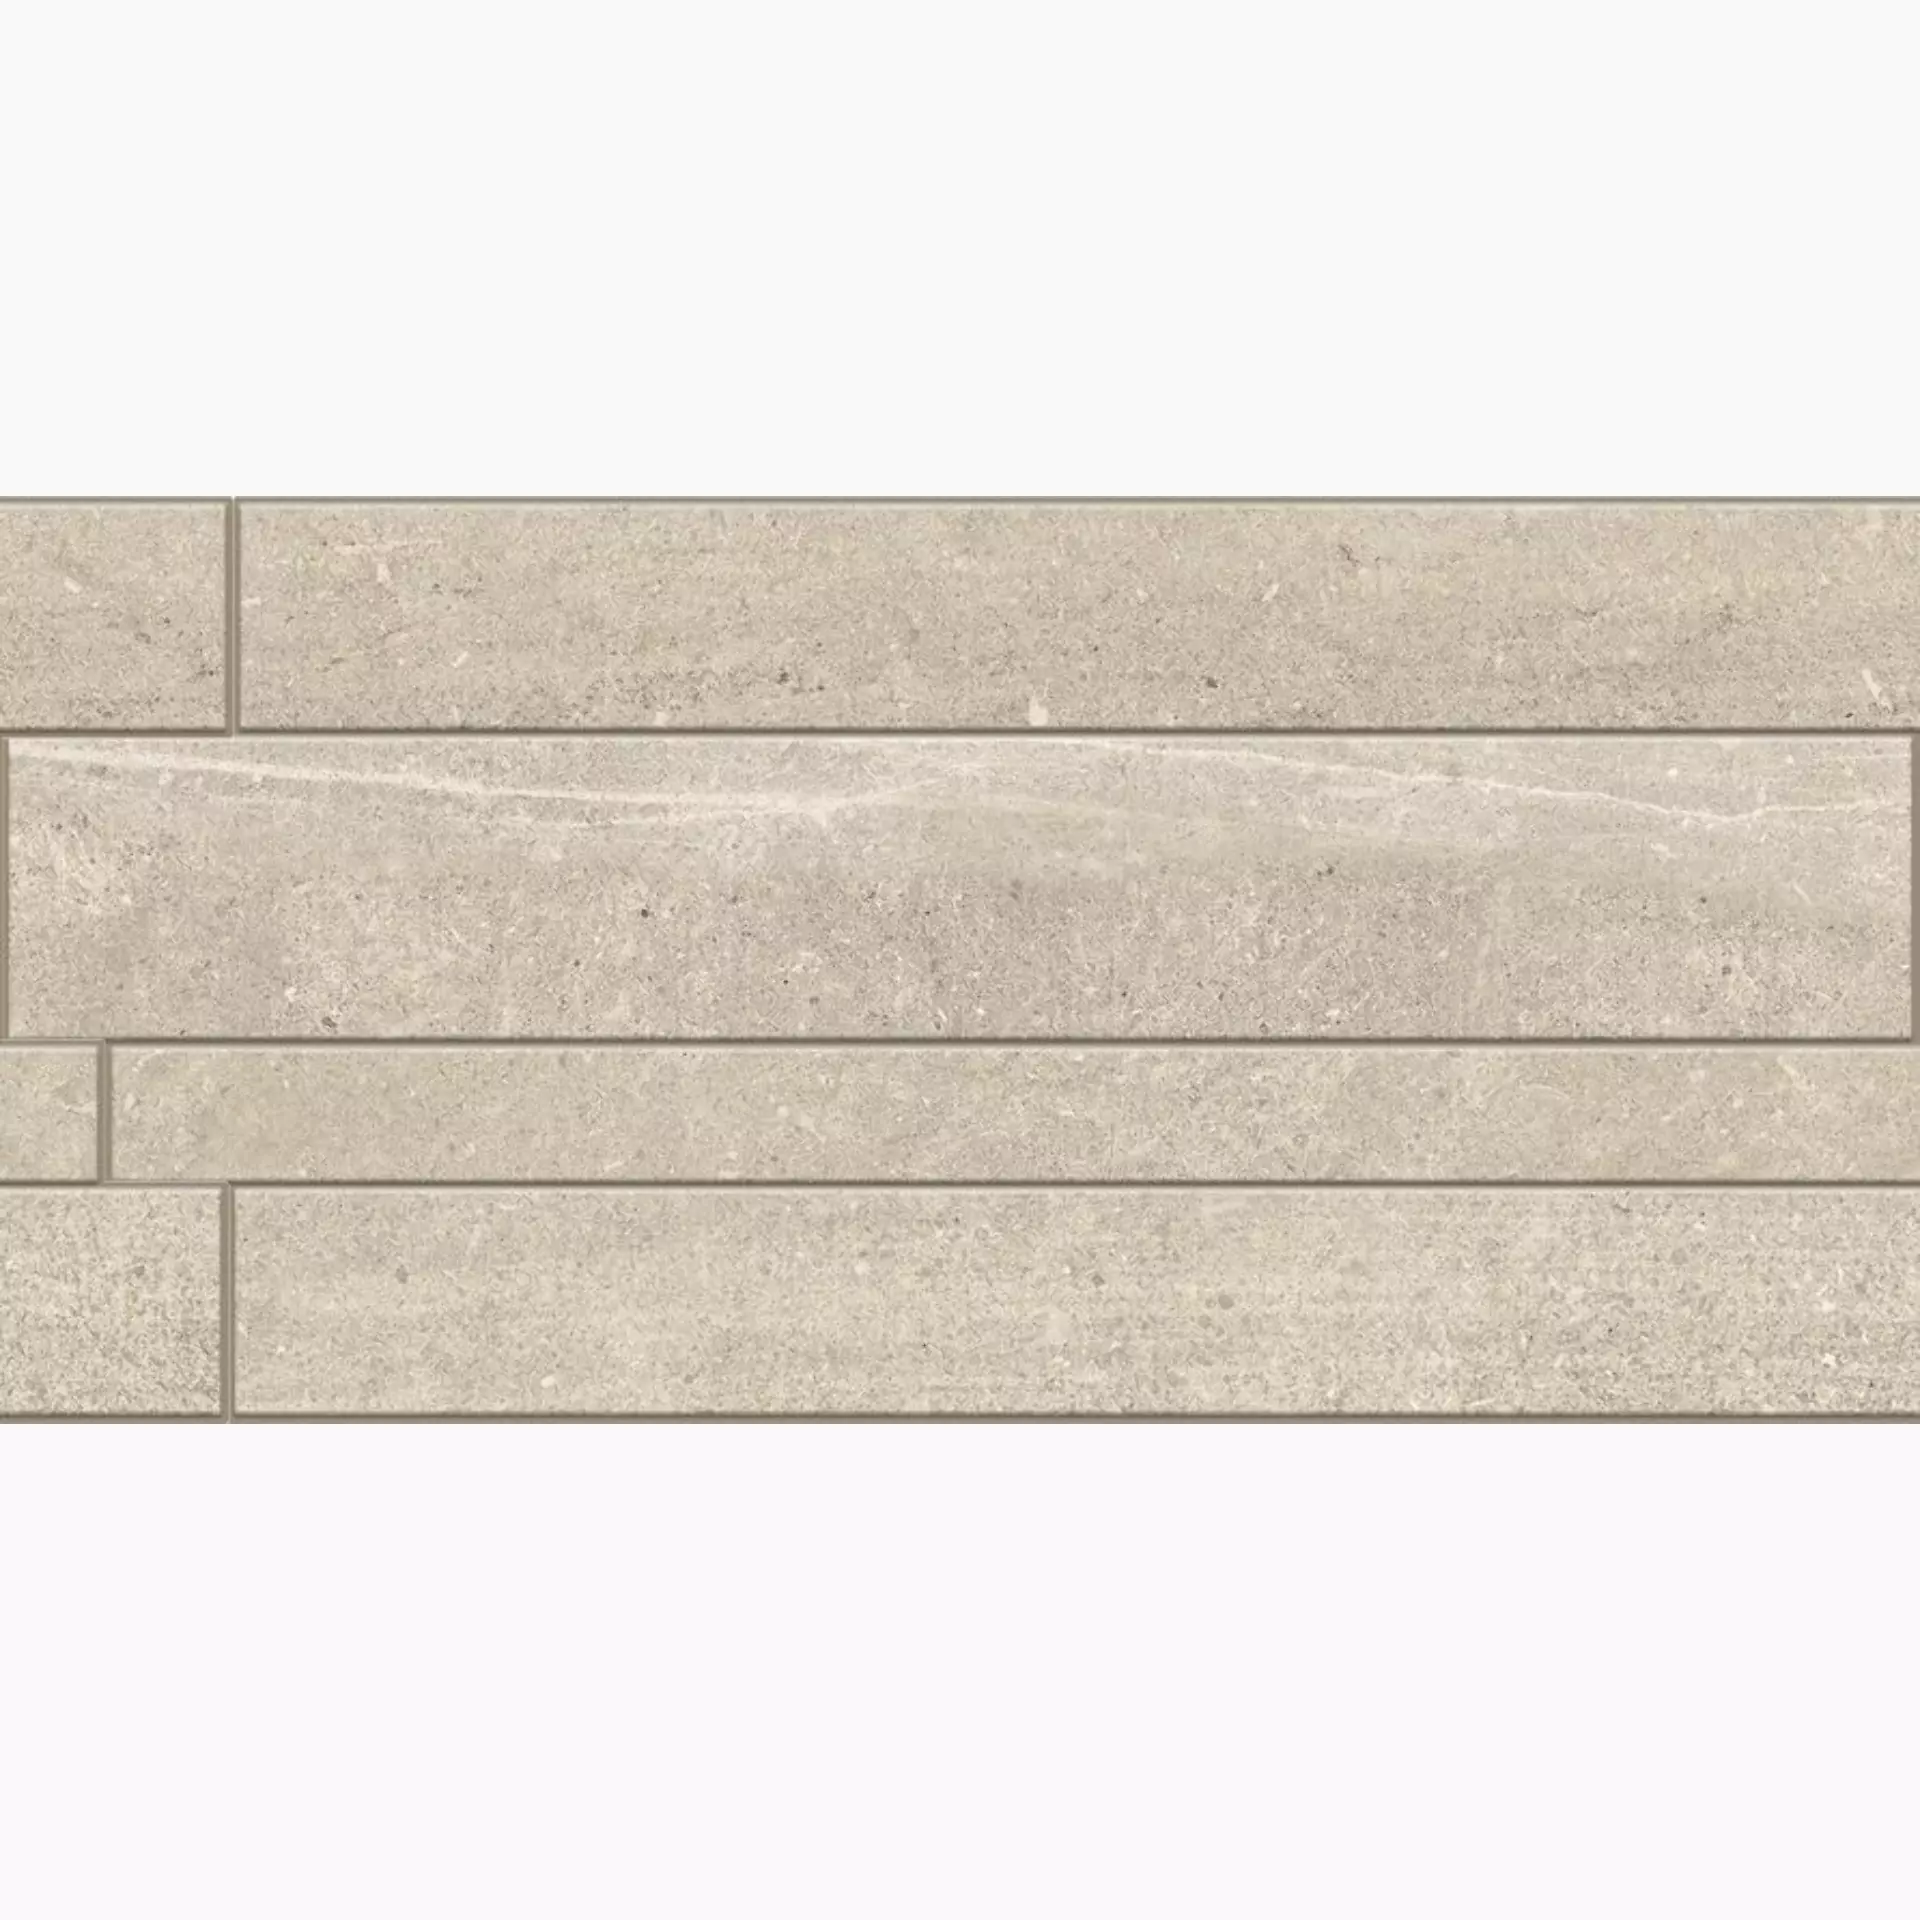 Century Uptown Morningside Naturale – Lappato Mosaic Muretto 0094568 30x60cm rectified 9mm